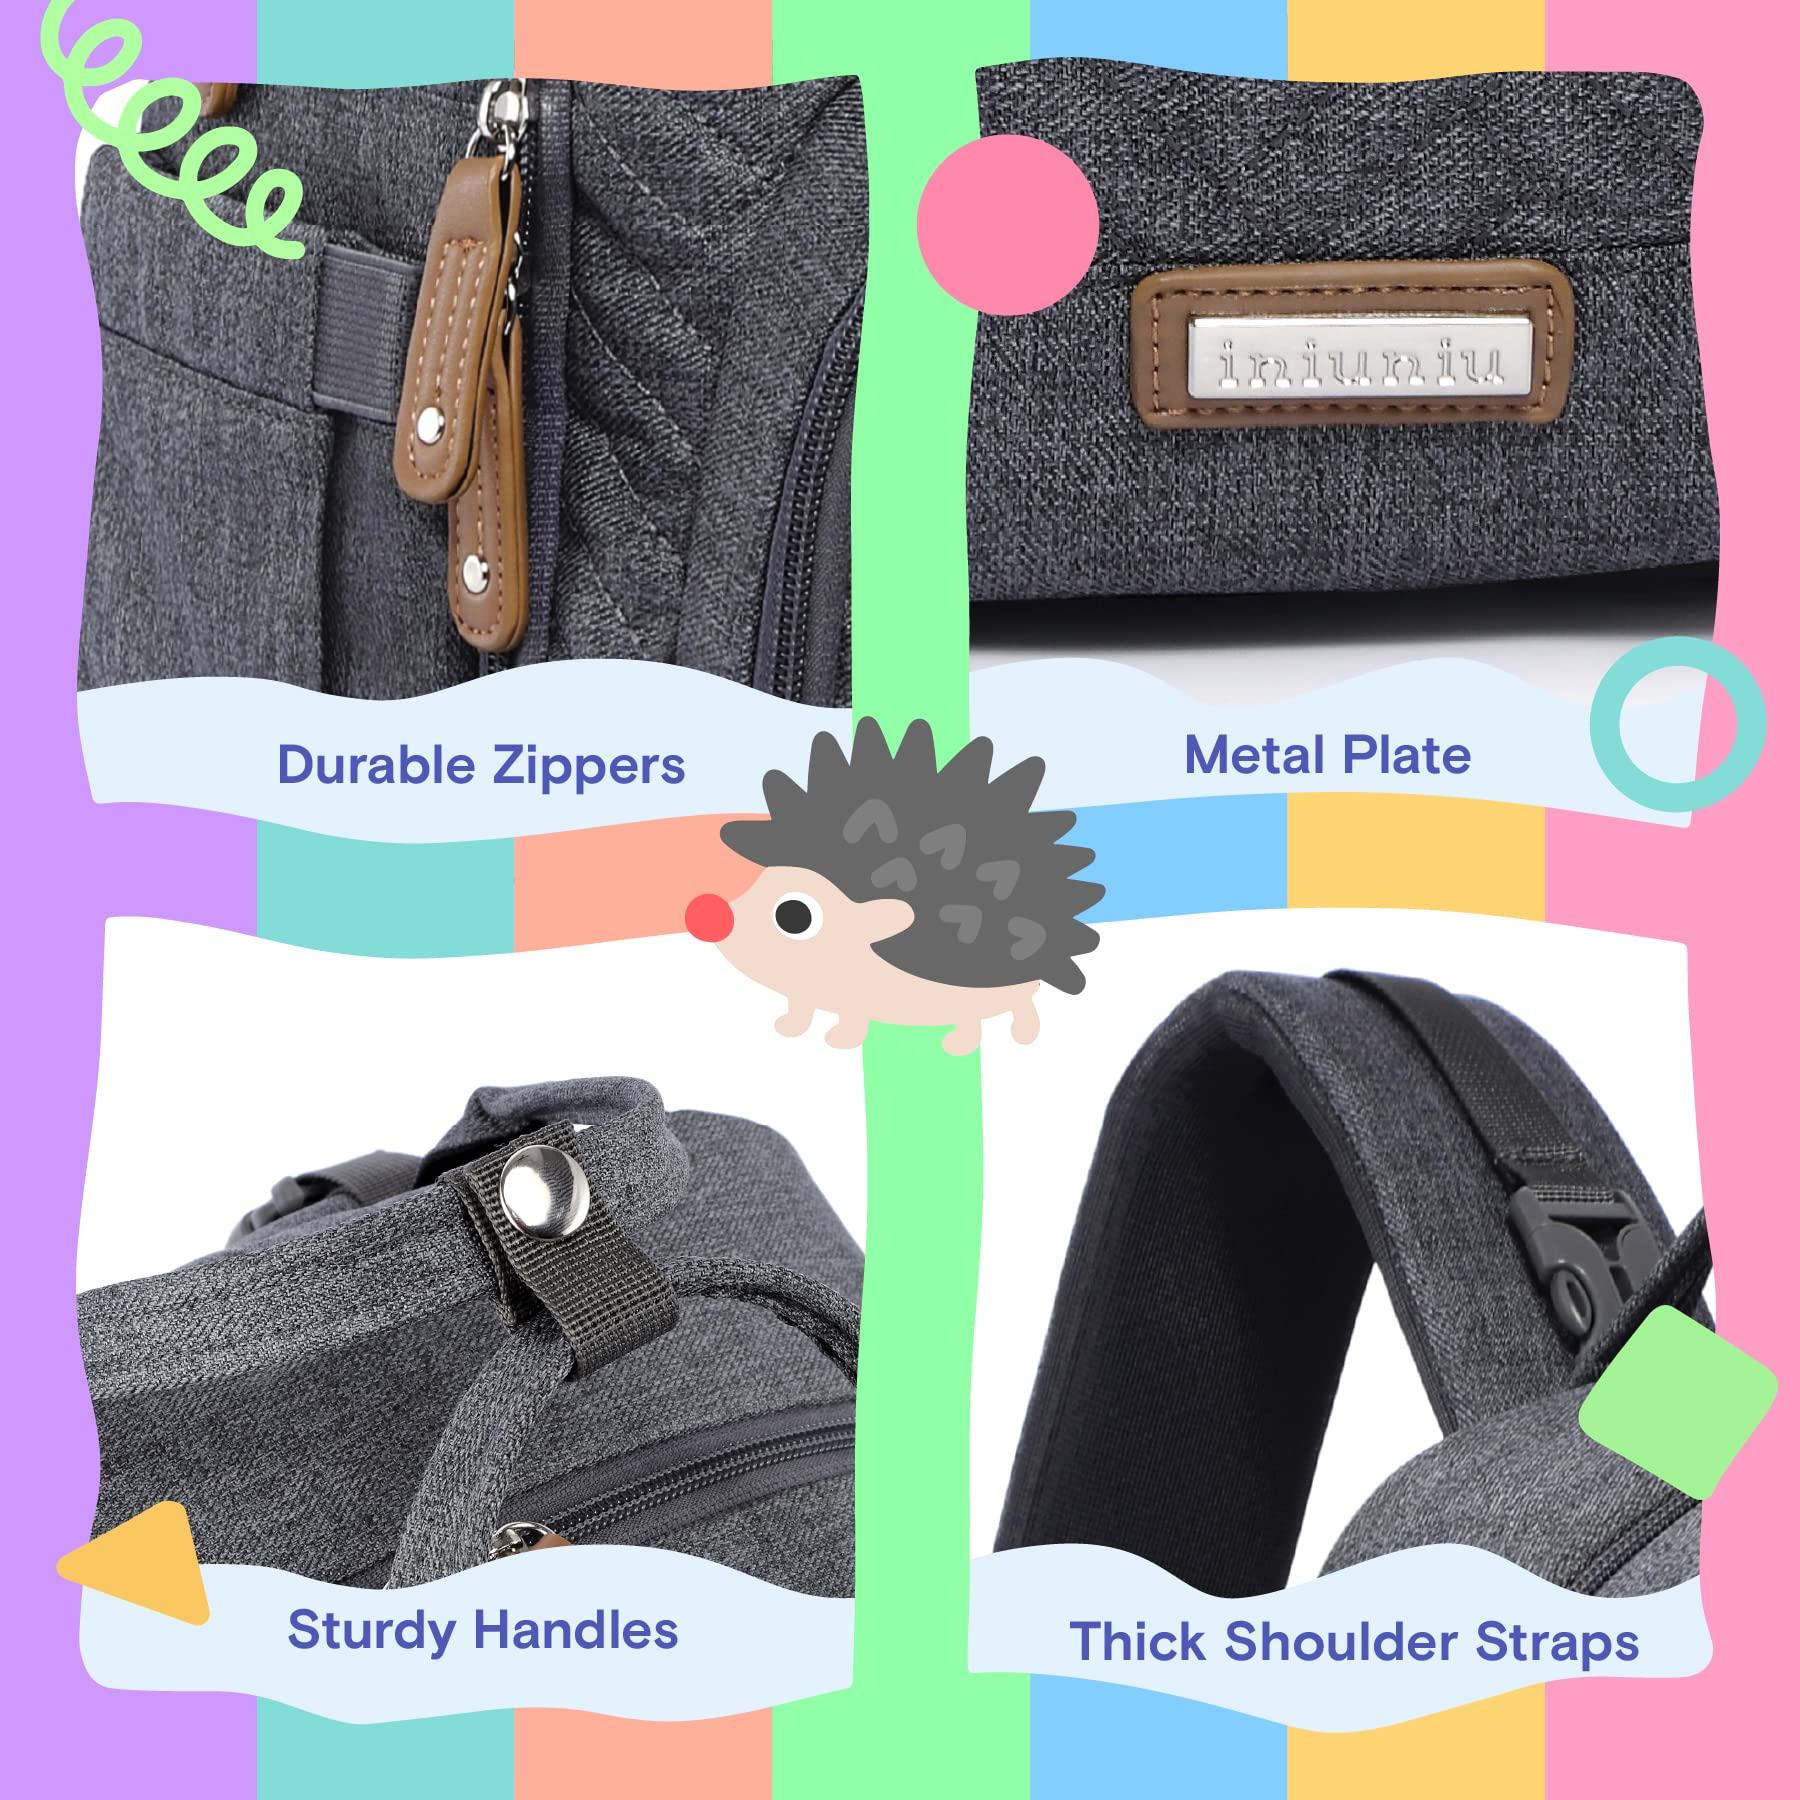 iniuniu Diaper Bag Backpack, 4 in 1 kit Large Unisex Baby Bags for Boys Girls, Waterproof Travel Back Pack with Diaper Pouch, Washable Changing Pad, Pacifier Case and Stroller Straps, Dark Gray